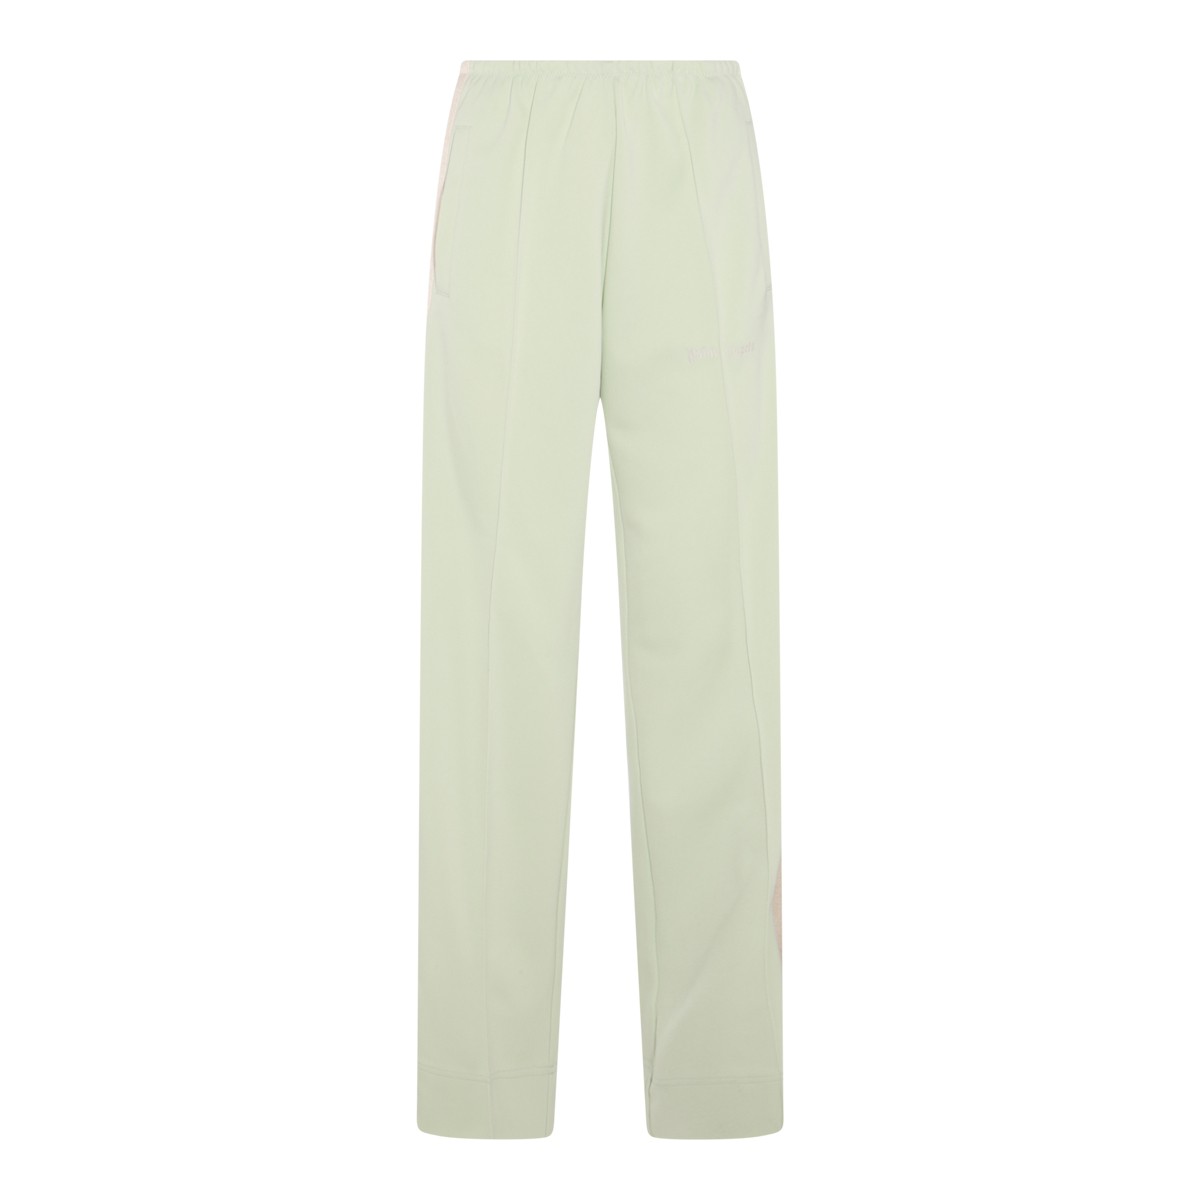 MINT GREEN, WHITE AND BLACK TRACK PANTS